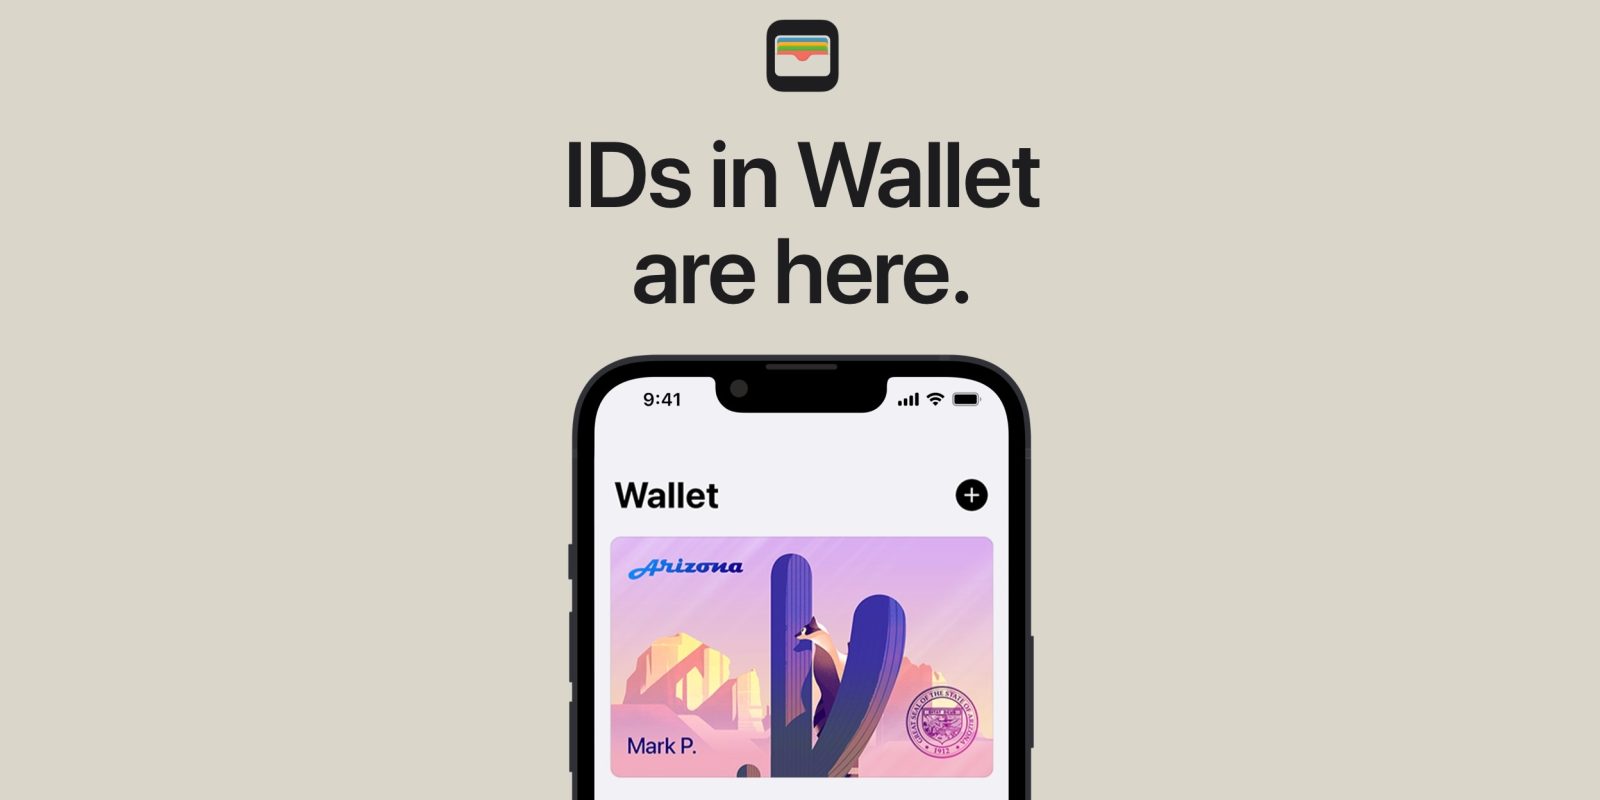 Apple Wallet Digital IDs now available